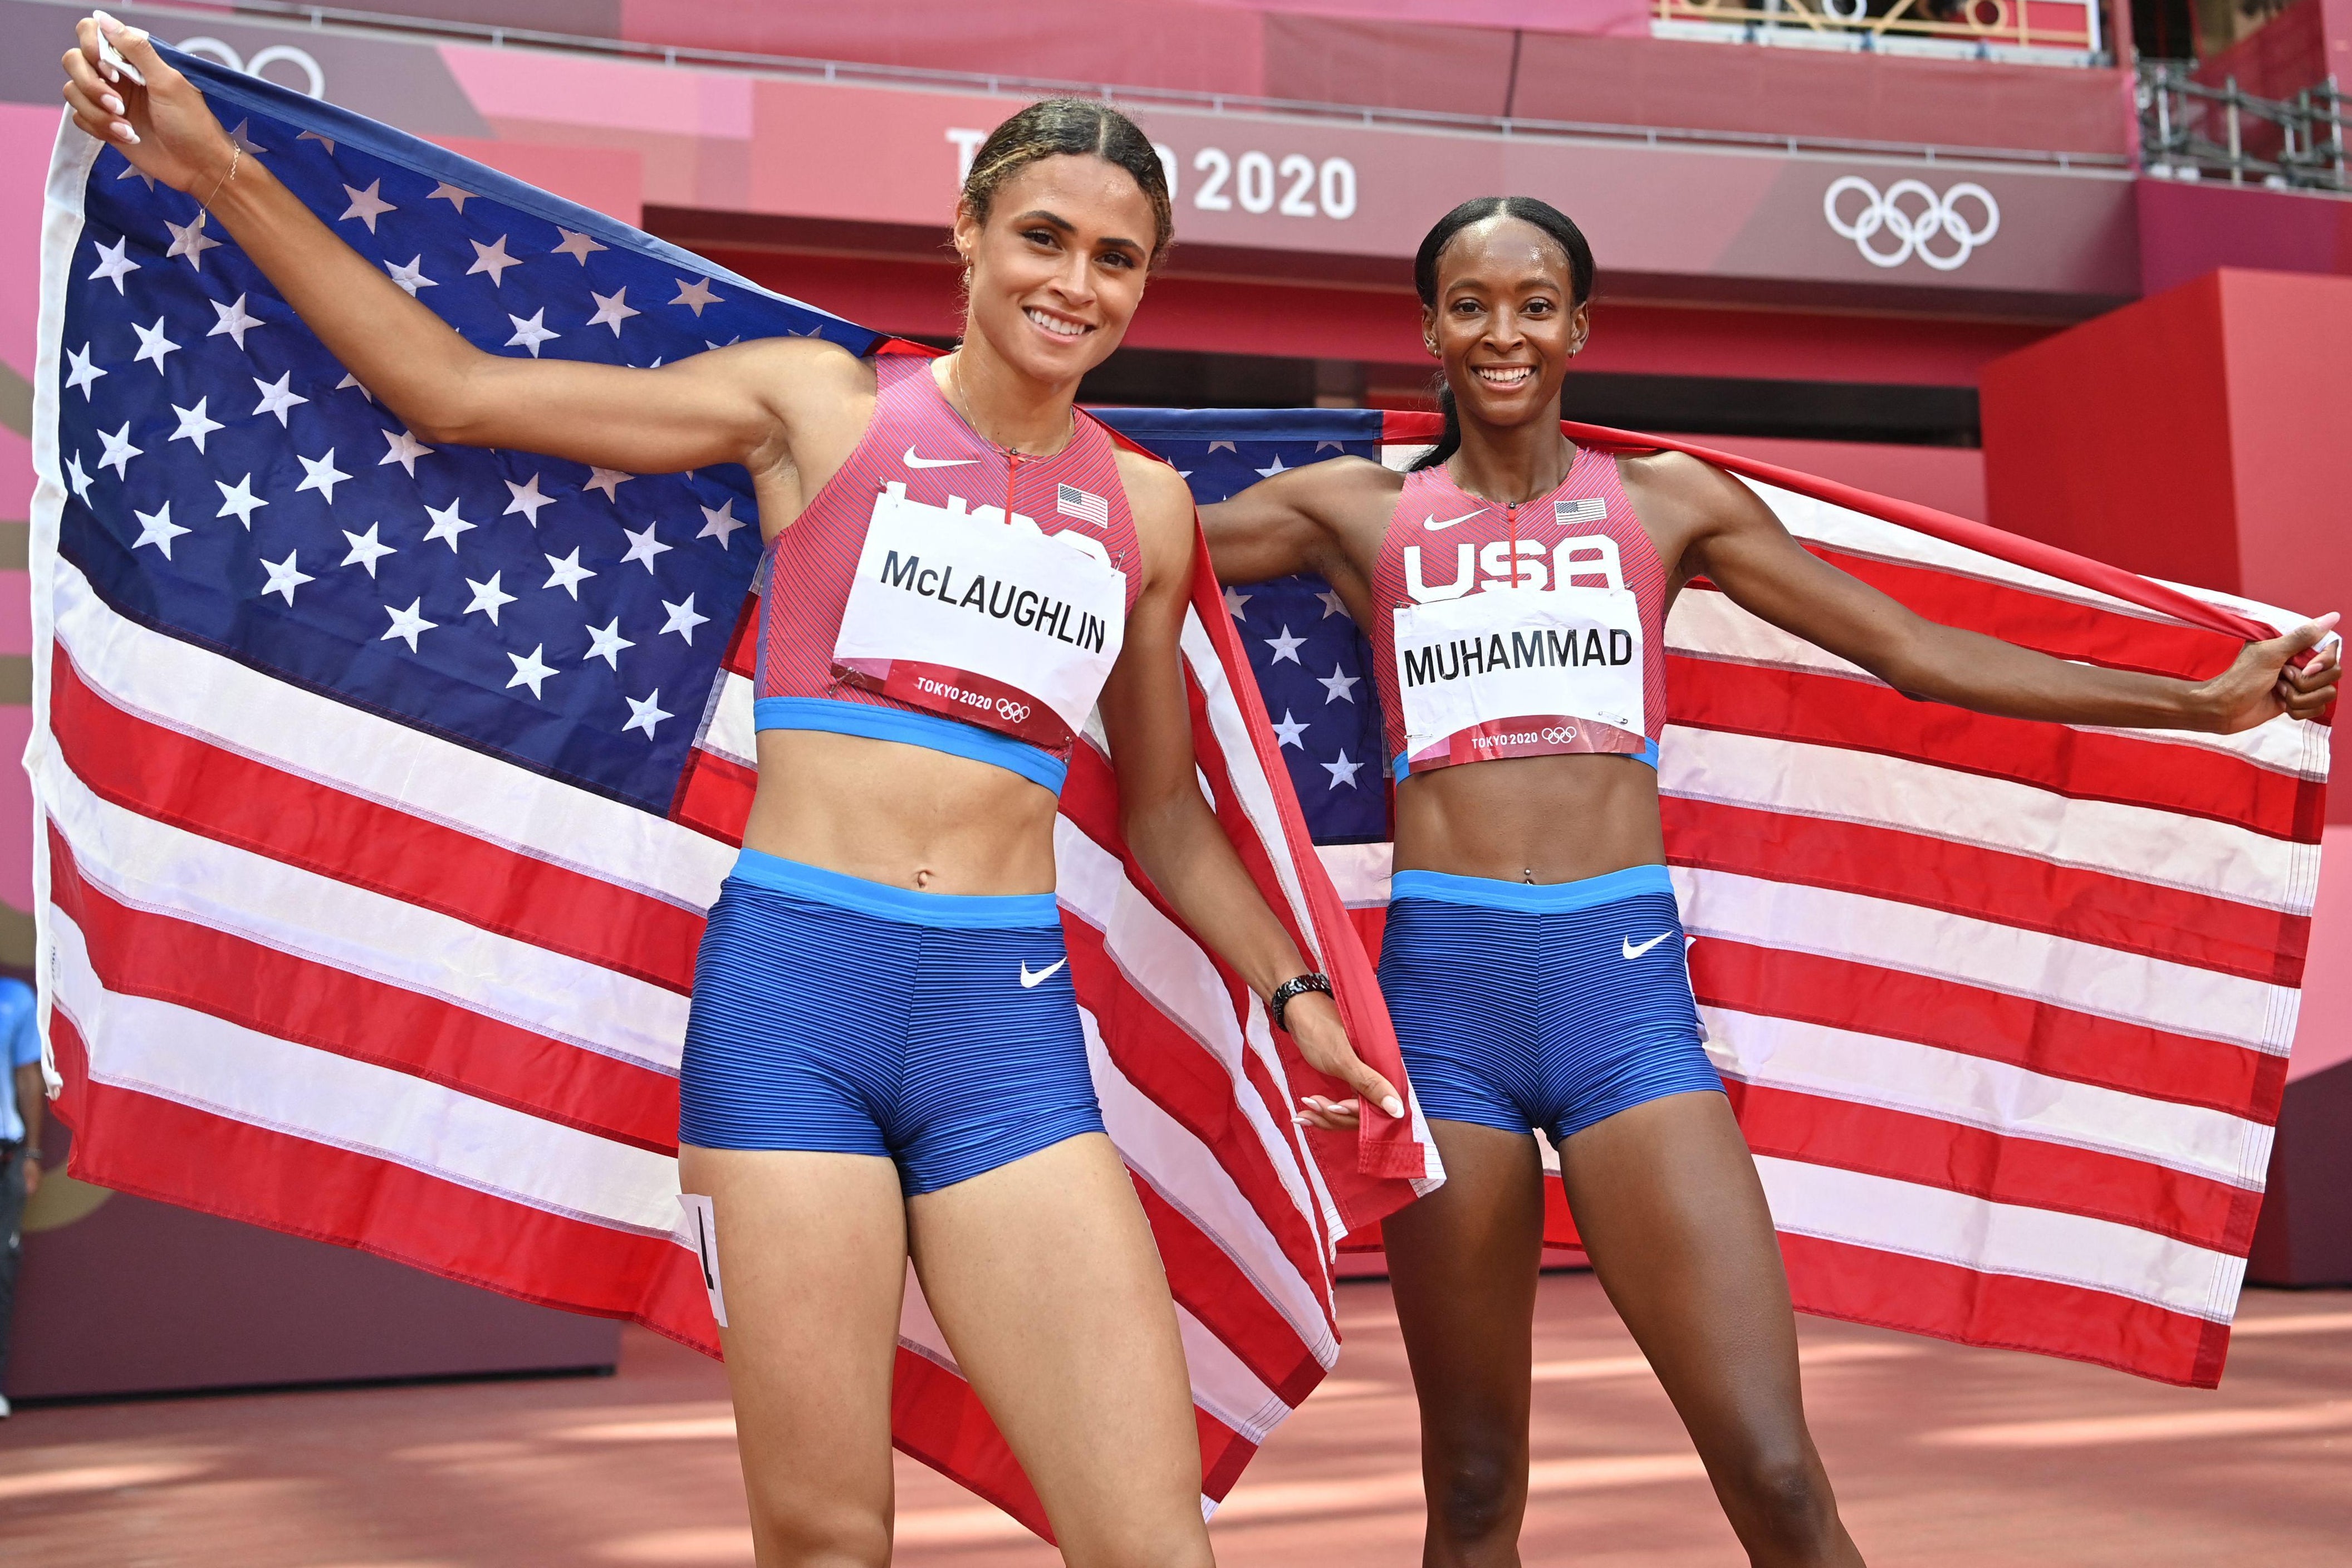 McLaughlin and Muhammad smile and drape American flags behind them on the track